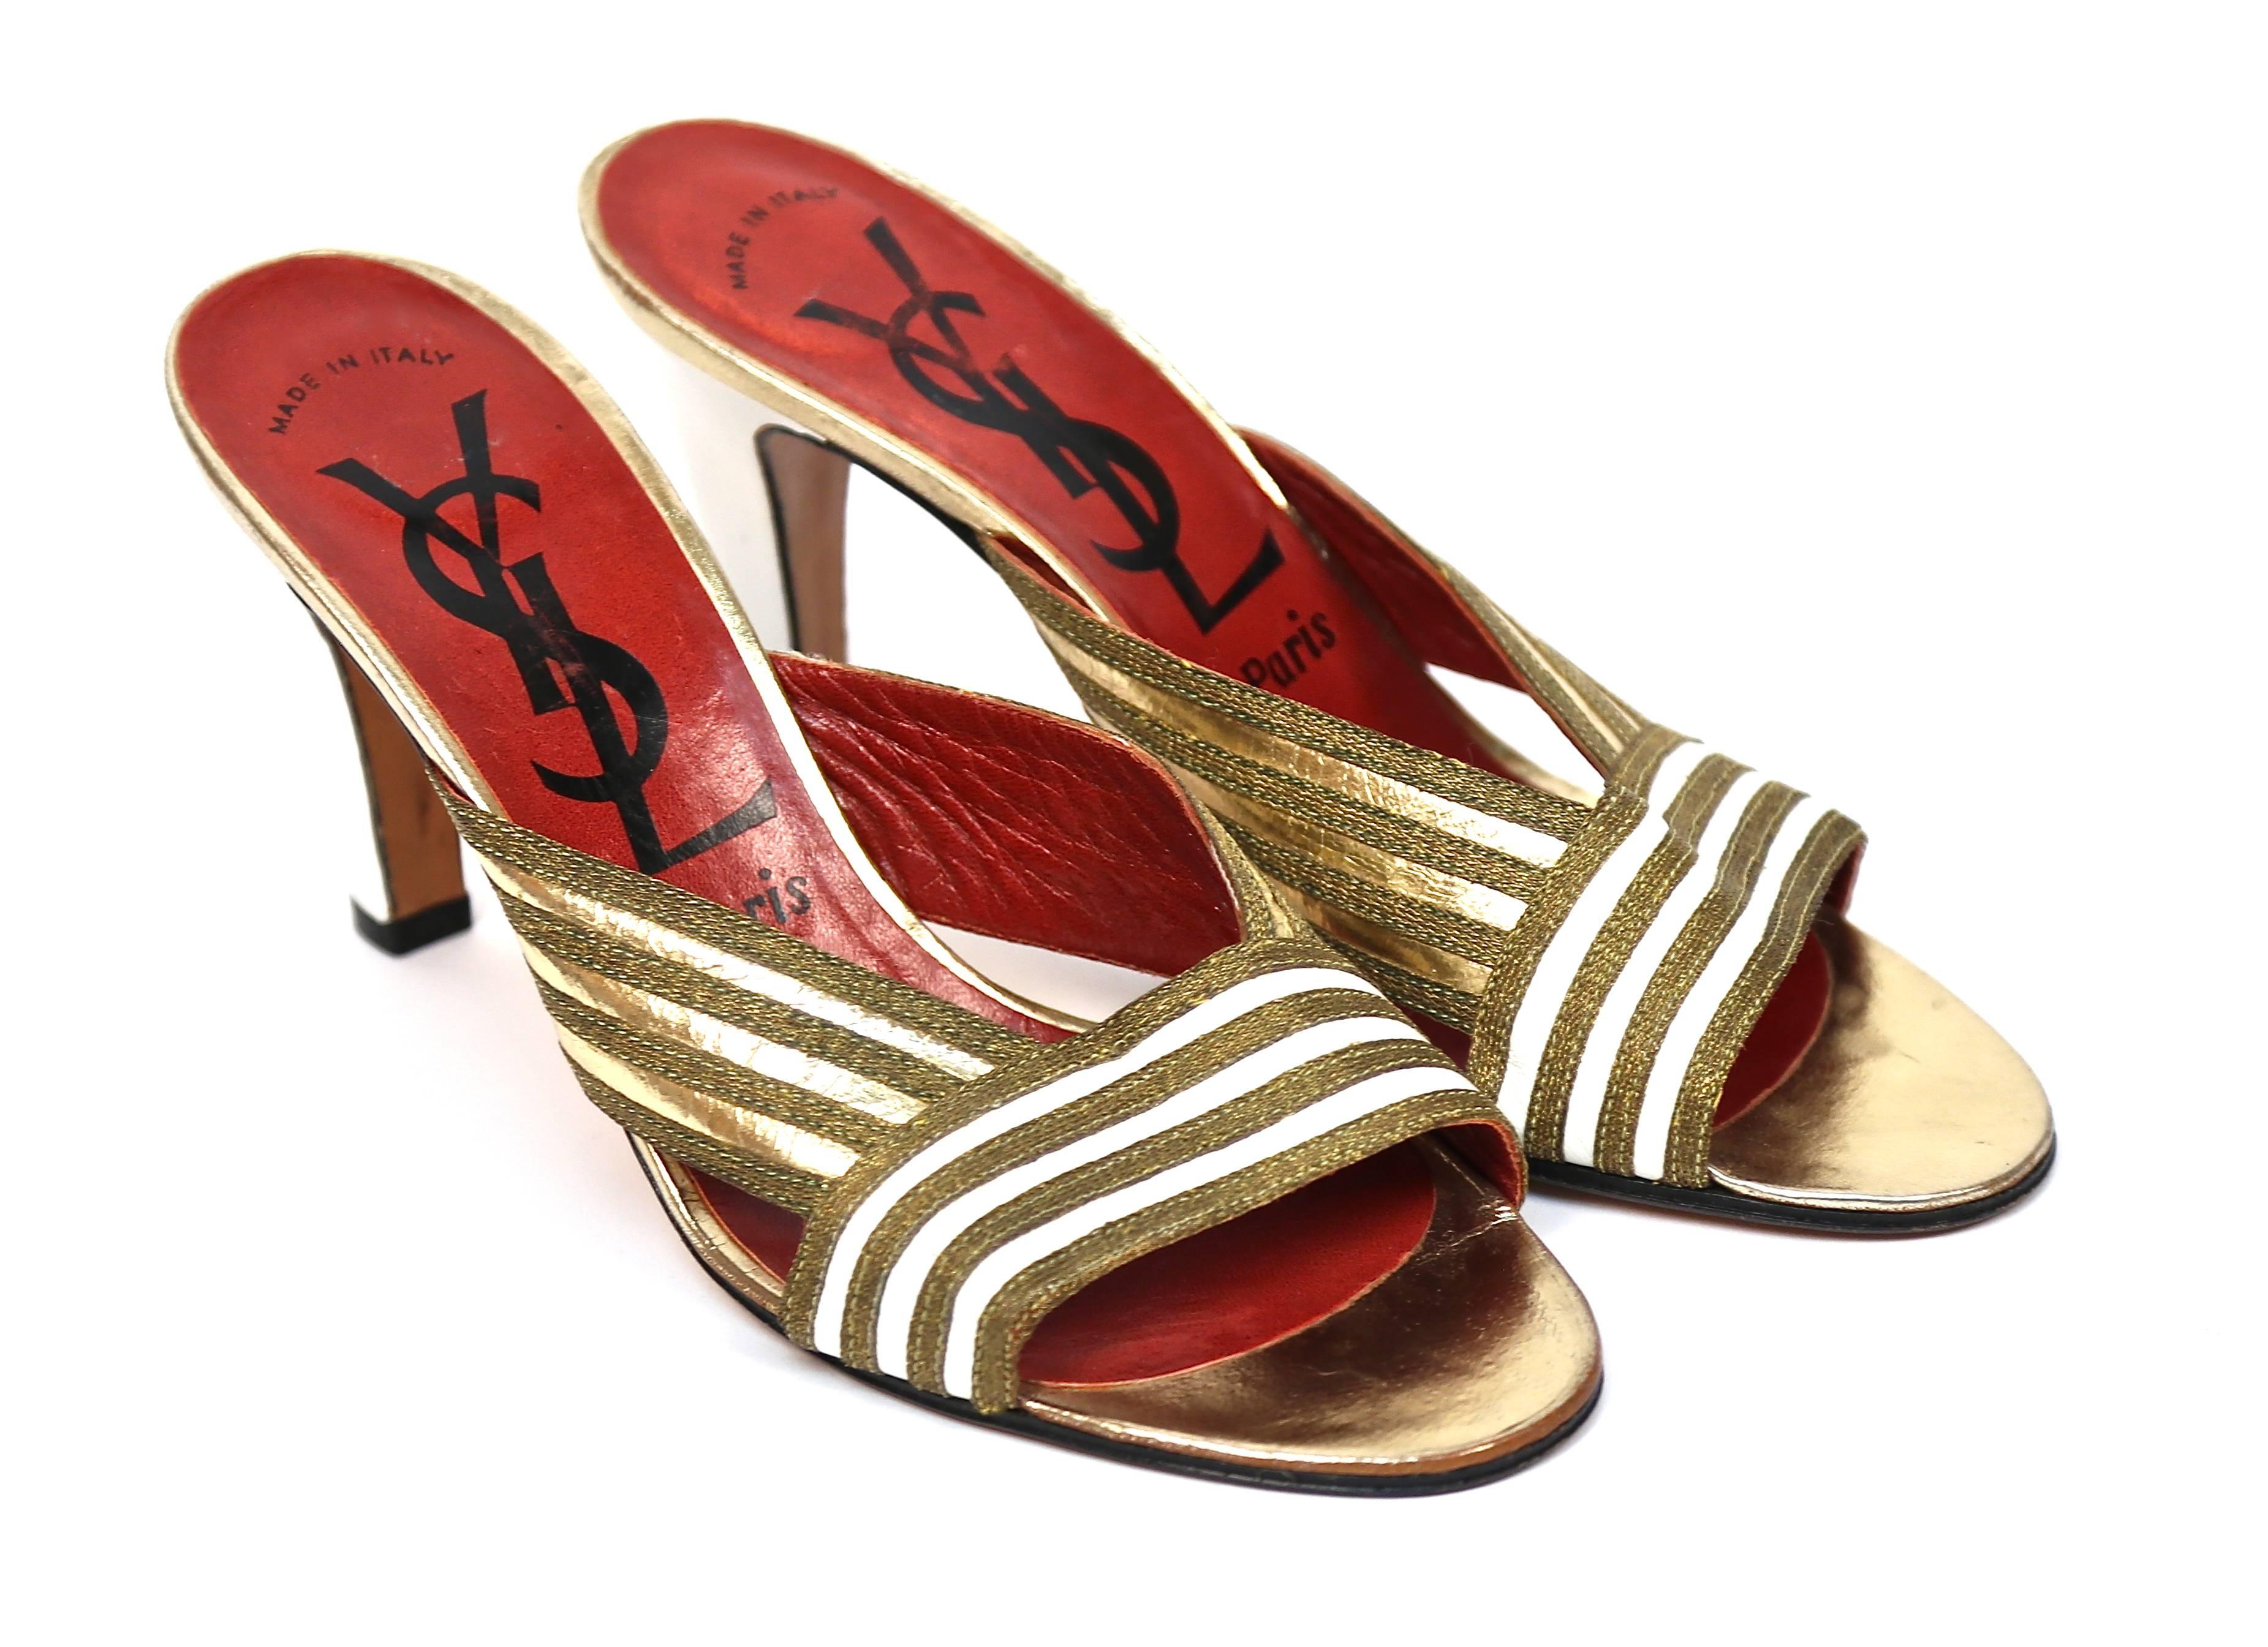 Unworn gold and white leather heels from Yves Saint Laurent dating to the late 1970's. Size. 6.5. Insoles measure approximately 9.5